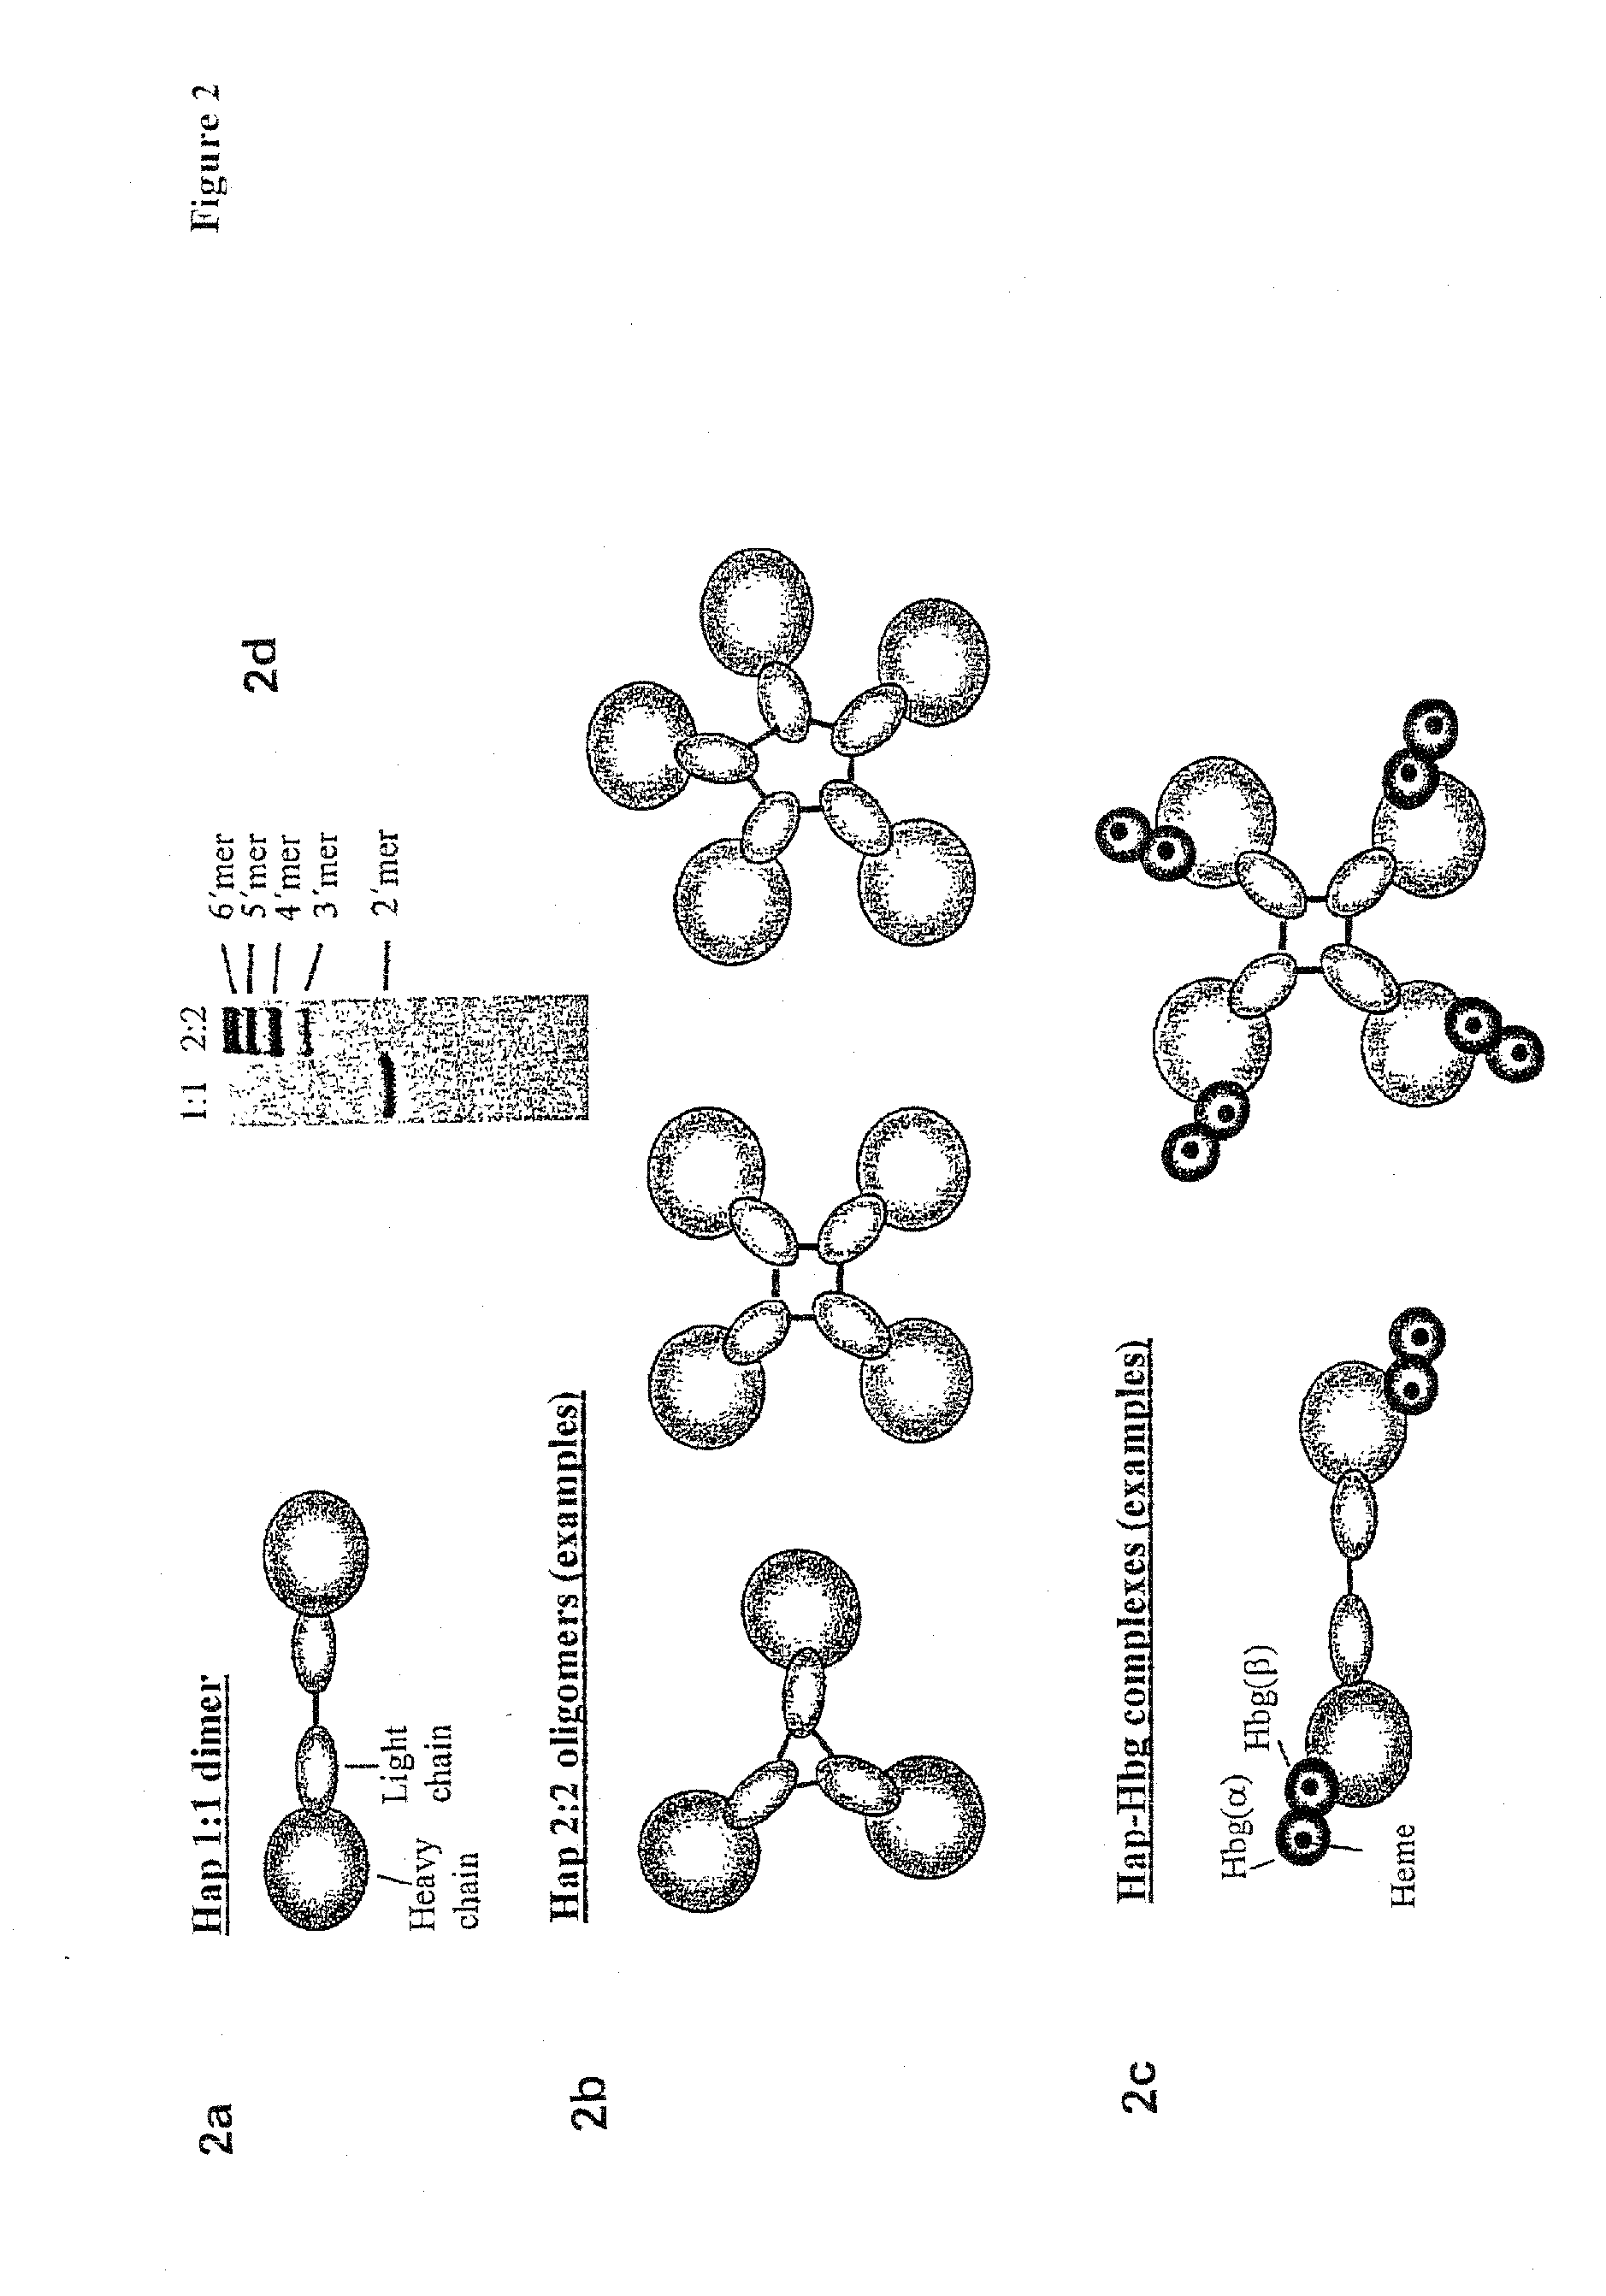 Function of a haptoglobin-haemoglobin receptor and the uses thereof